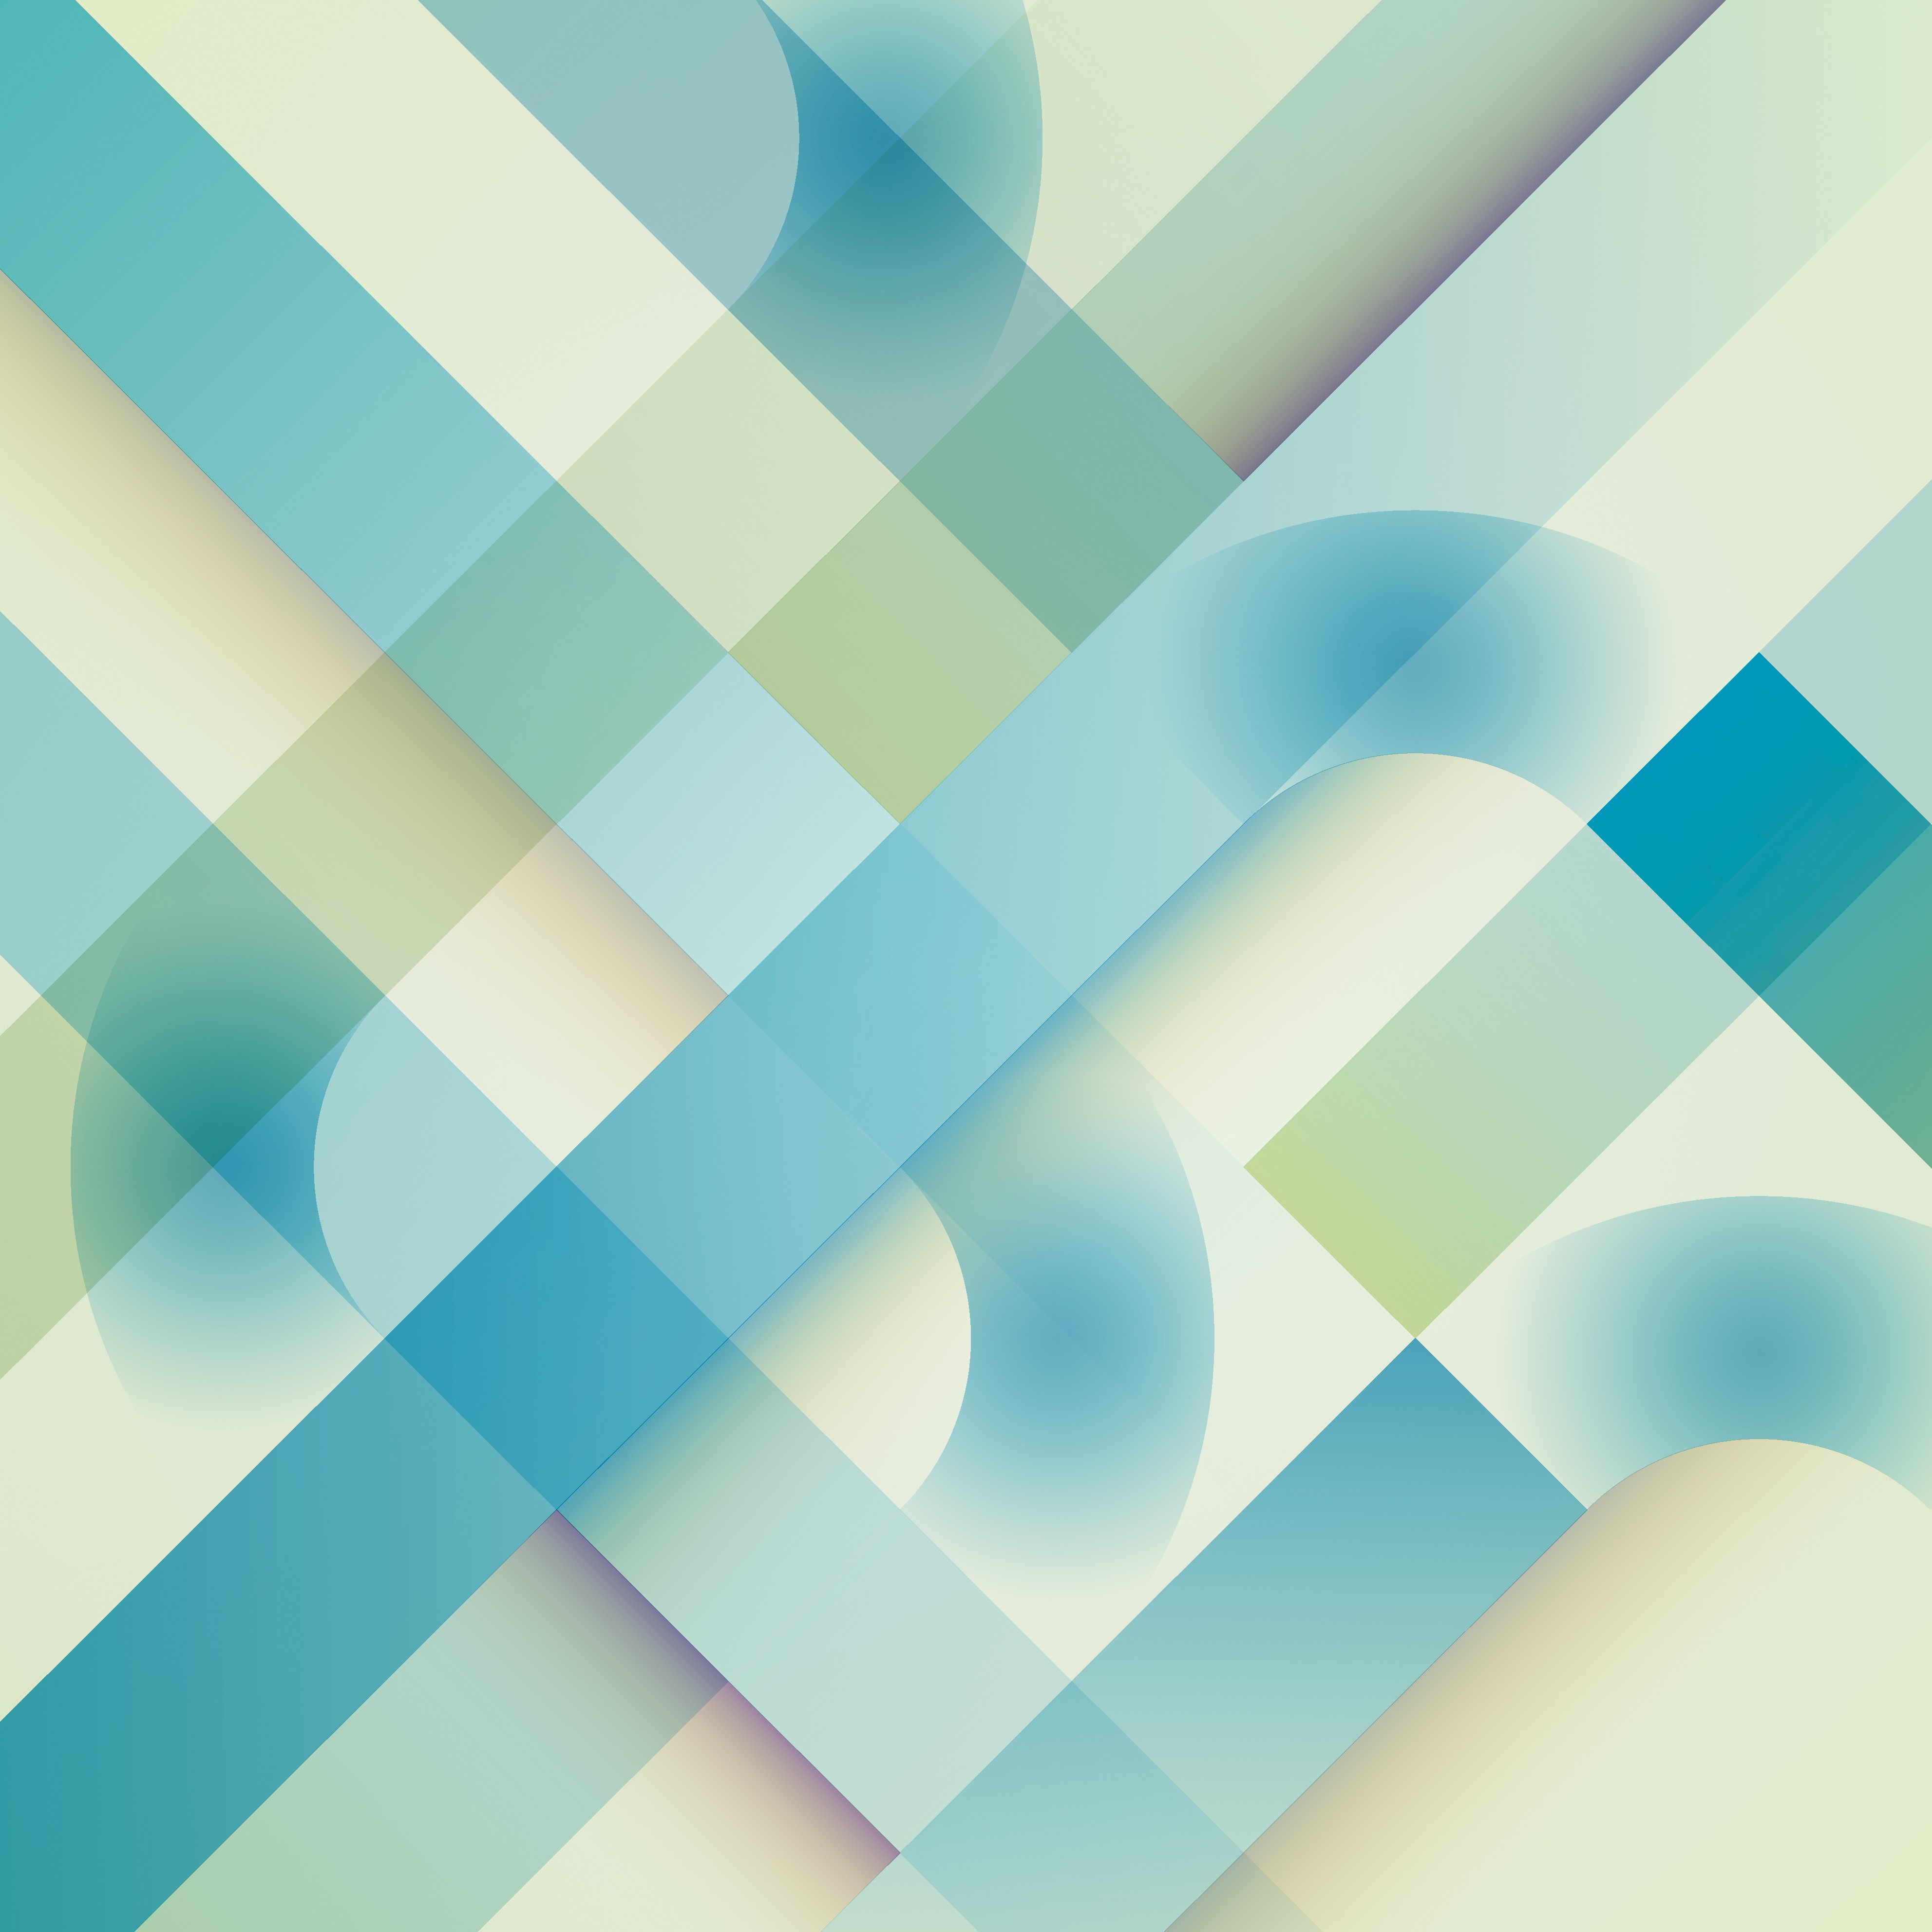 Download the Android L Developer Preview Wallpapers Here 3966x3966